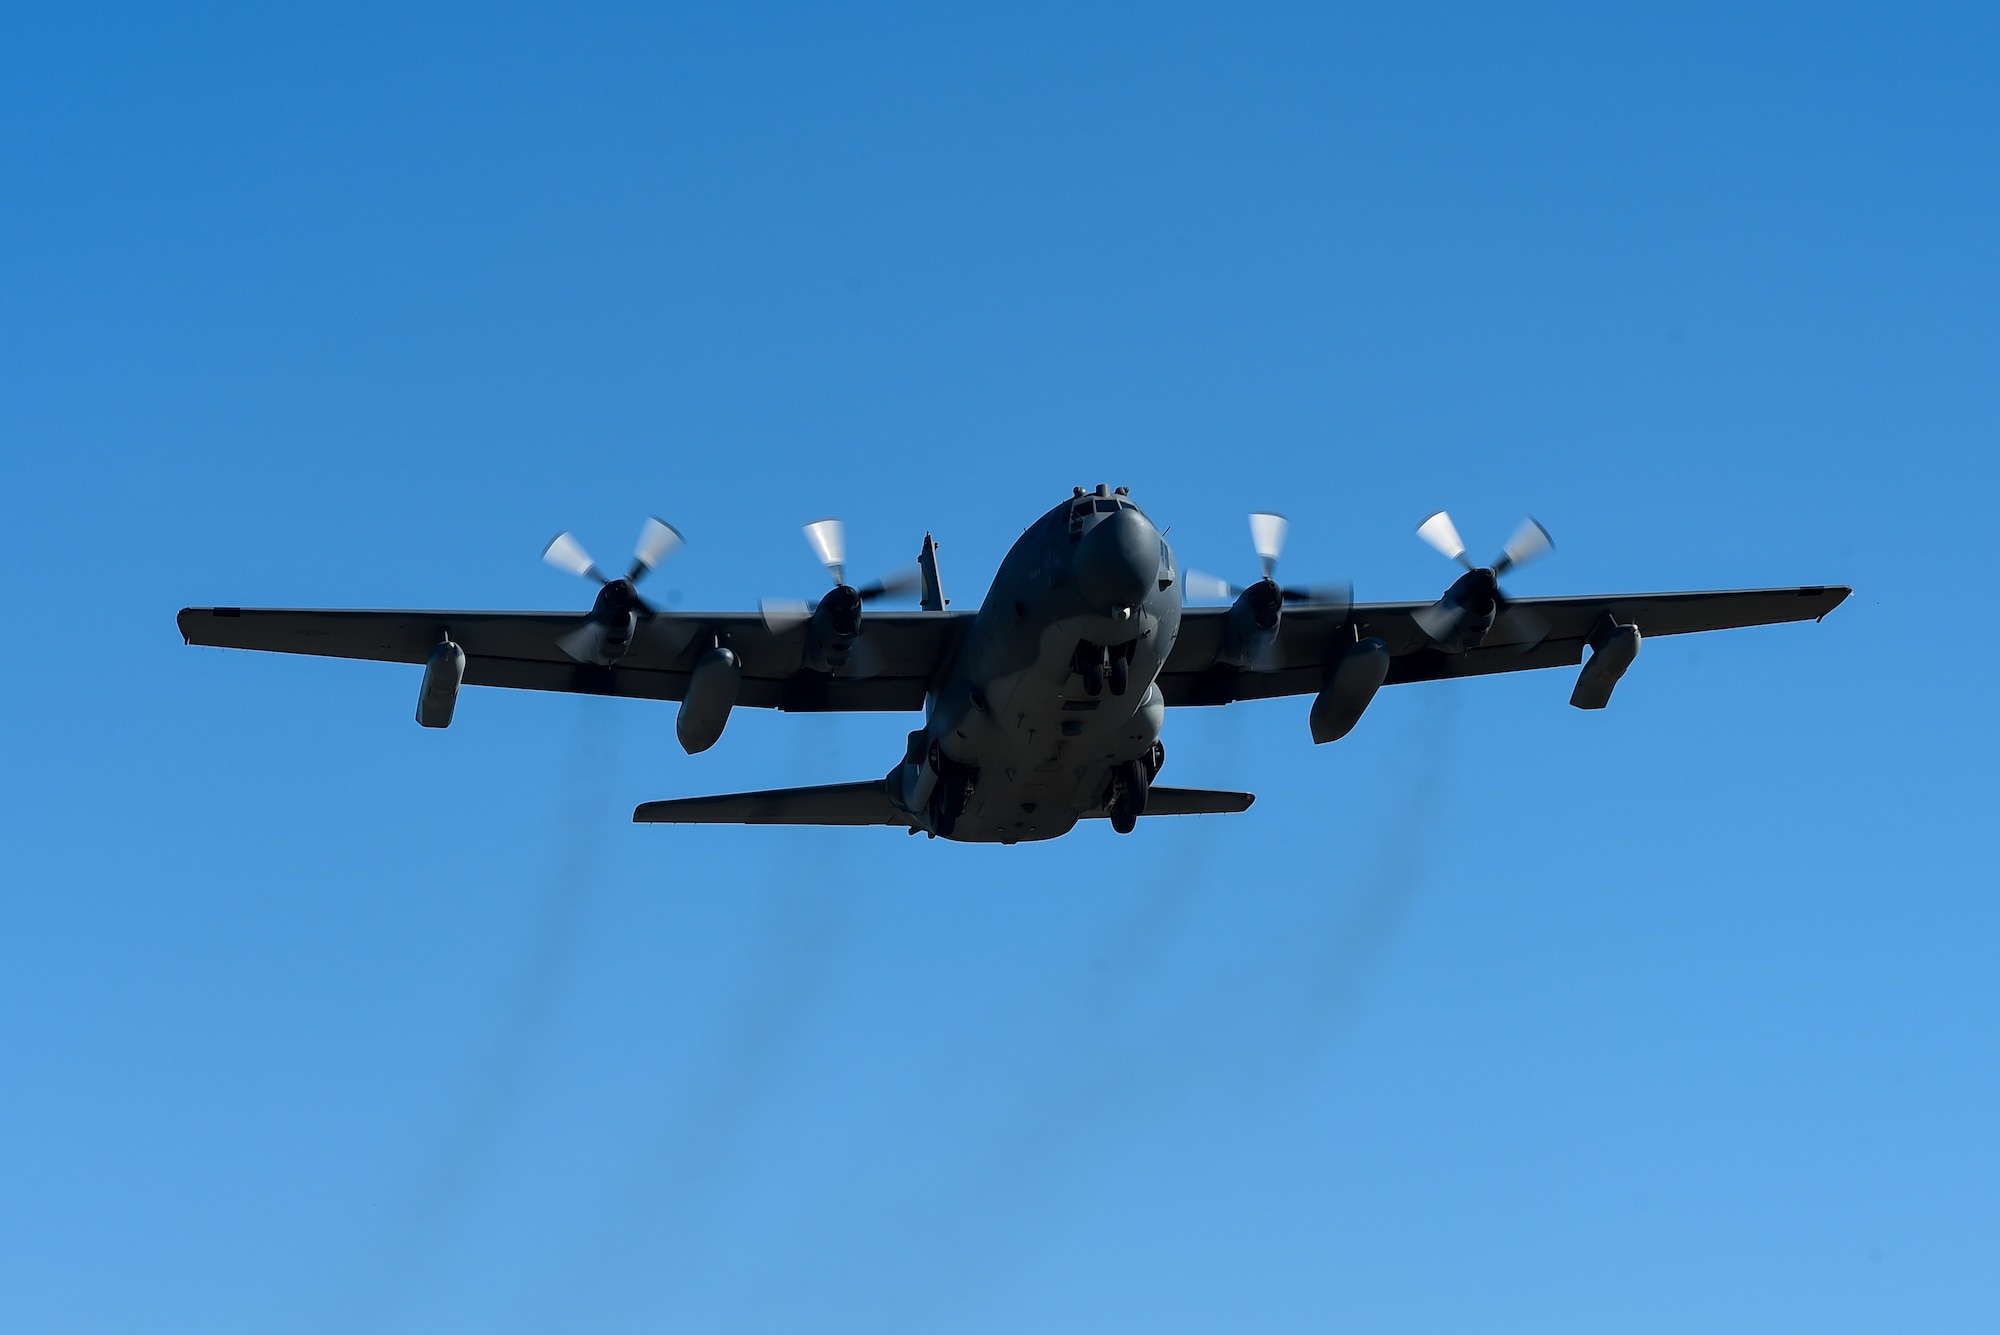 An MC-130H Combat Talon II participates in a training mission during Task Force Exercise Southern Strike at Camp Shelby, Miss., Oct. 29, 2016. The 1st Special Operations Wing spent two weeks providing  air support to Joint Special Operations Command forces during training missions at Southern Strike. (U.S. Air Force photo by Senior Airman Jeff Parkinson)